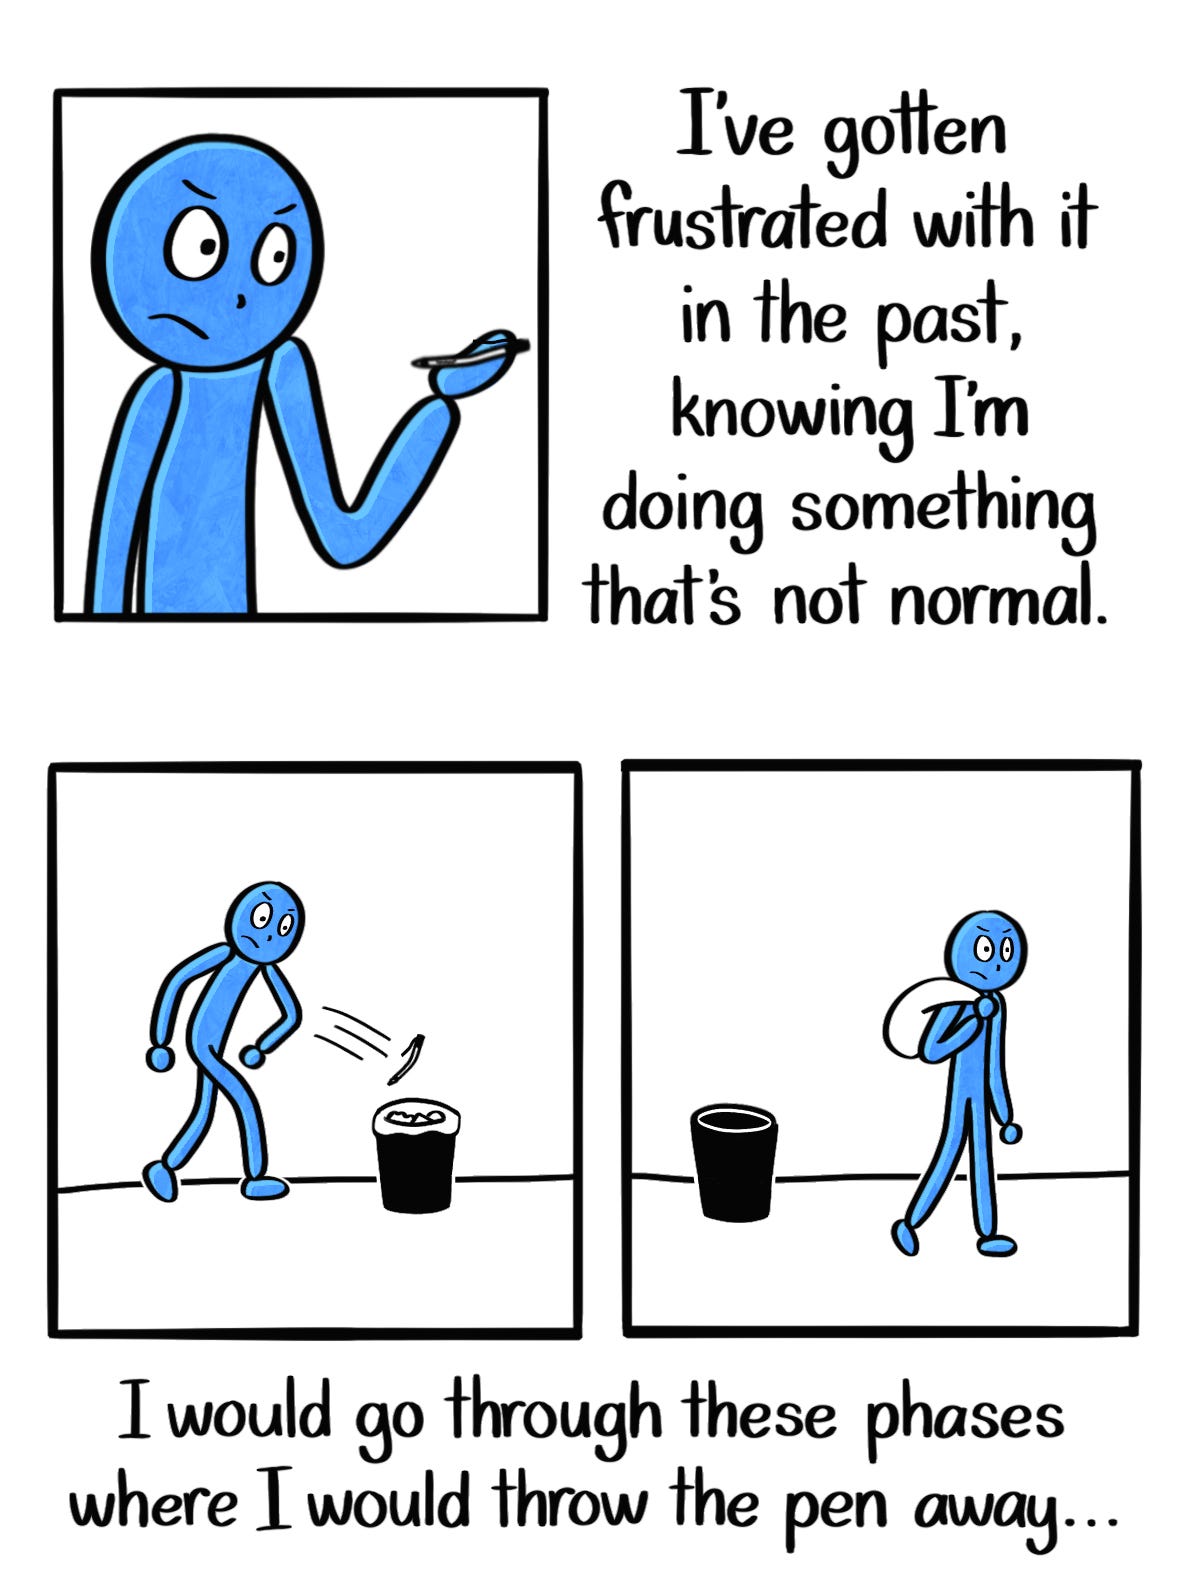 Caption: I've gotten frustrated with it in the past, knowing I'm doing something that's not normal. I would go through these phases where I would throw the pen away... Image: Three panels, showing the Blue Person looking at the pen angrily, tossing it violently into a mini trash can, and carrying the trash bag around their shoulder.